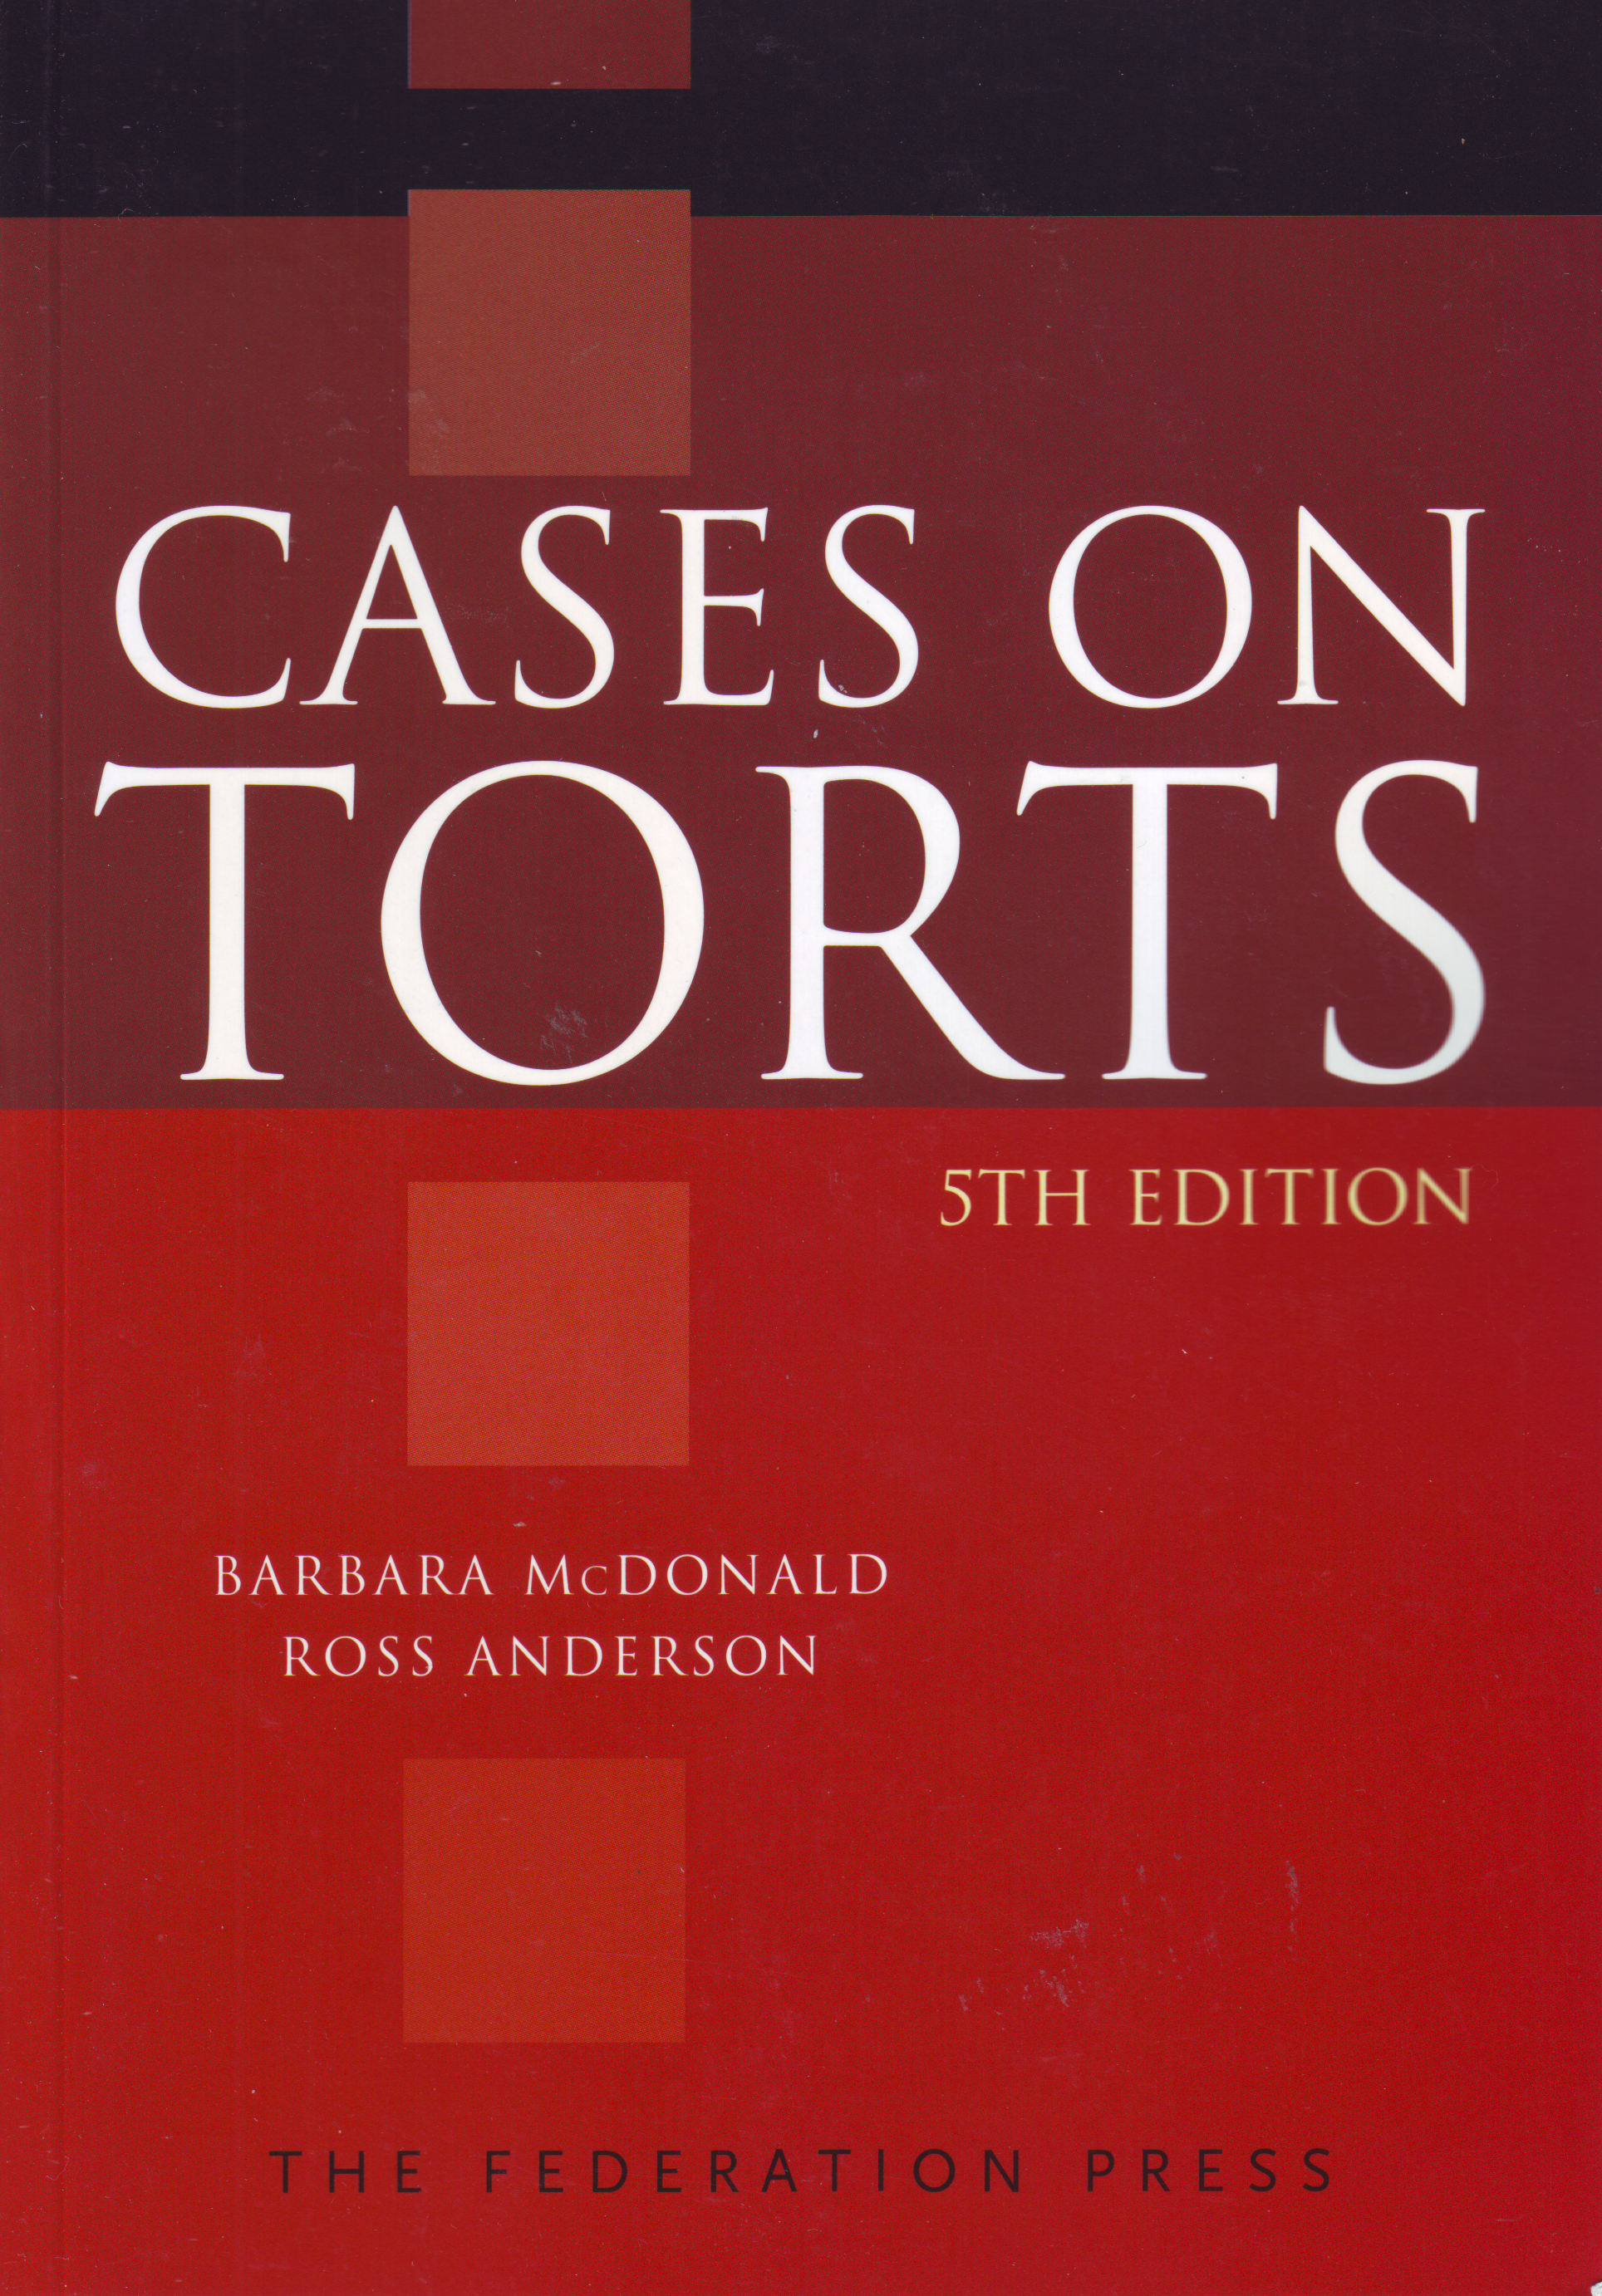 Cases on Torts 5e